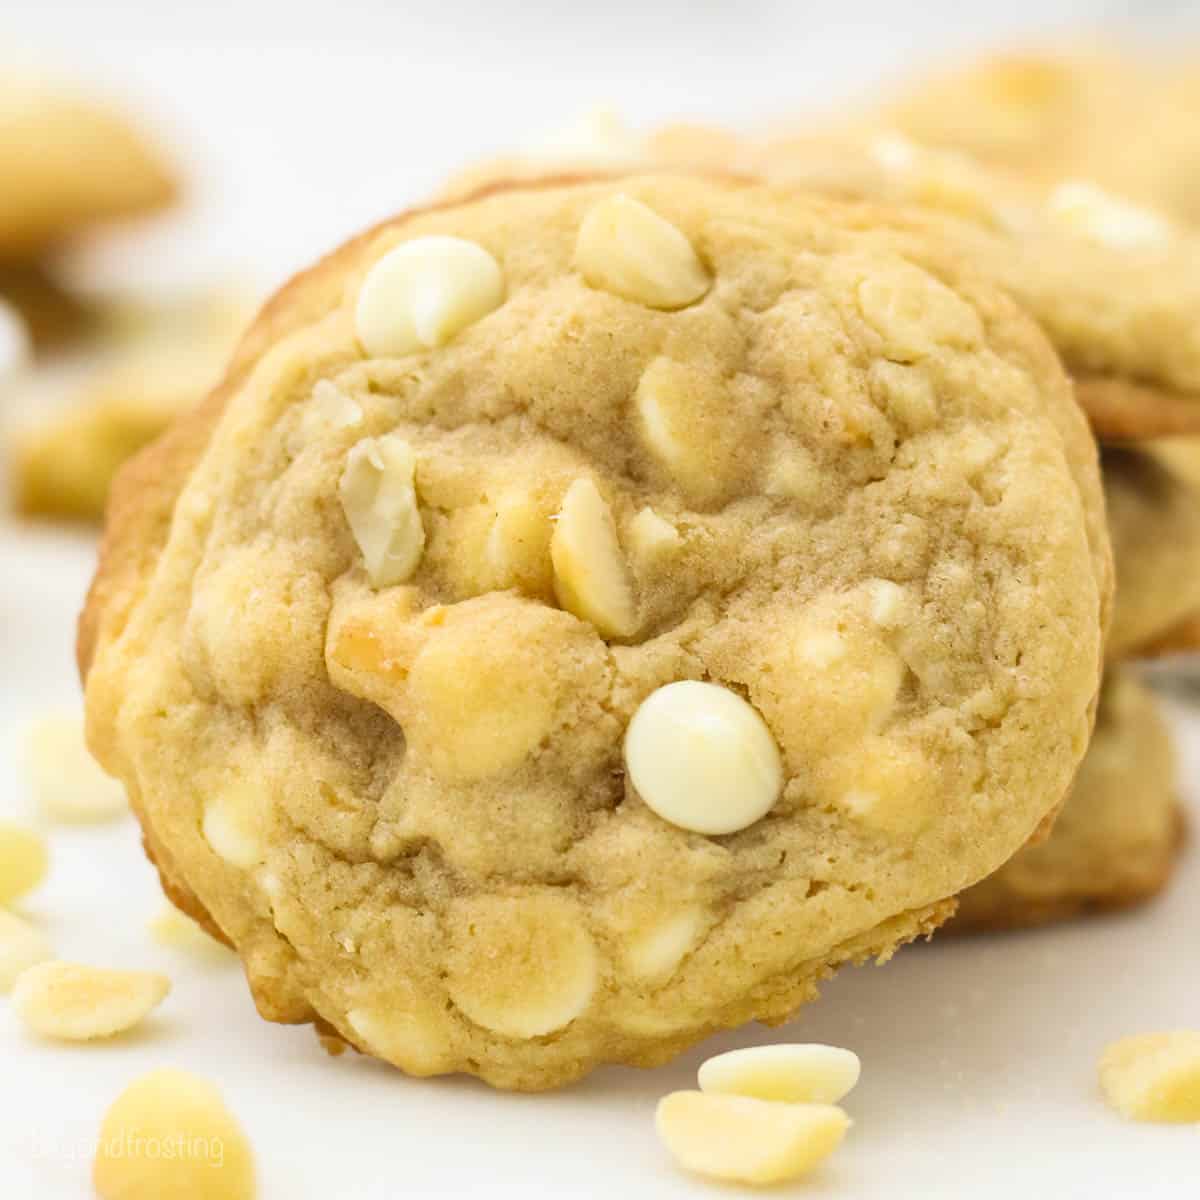 The Best White Chocolate Macadamia Nut Cookies | Beyond Frosting